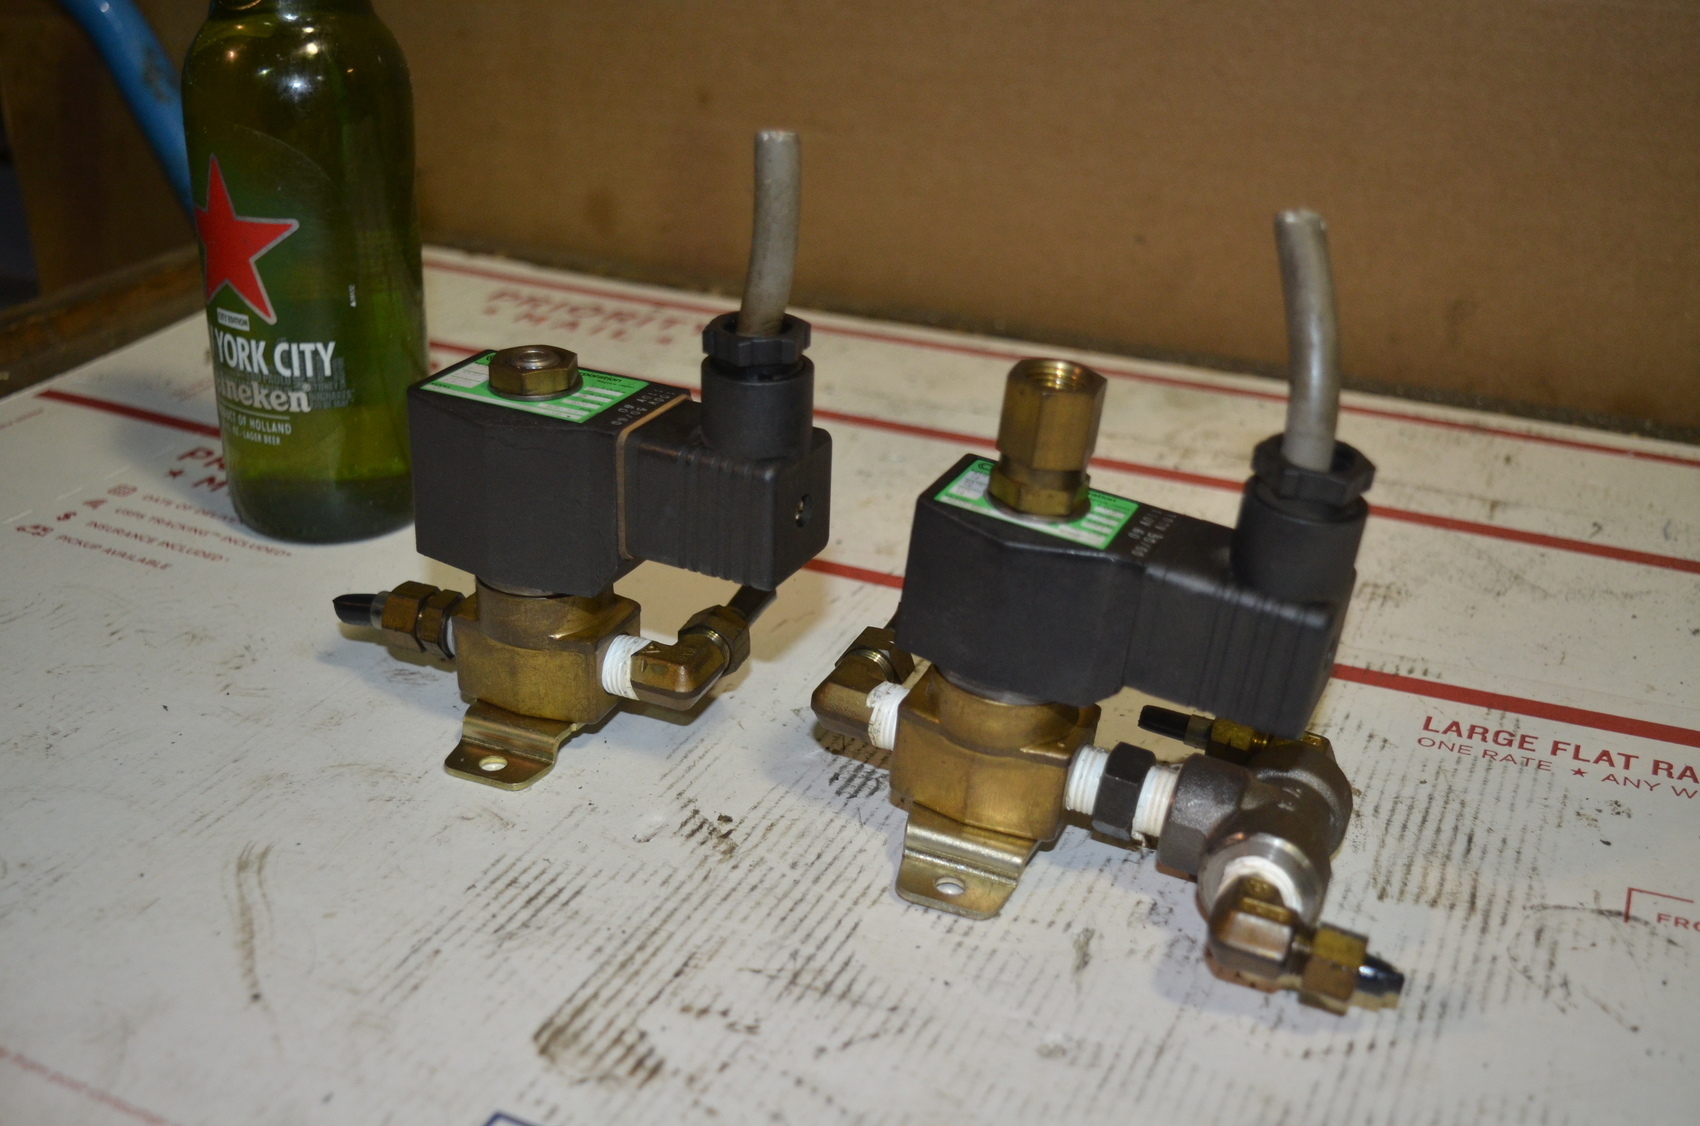 Lot of 2 CKD Solenoid valves AG33-02-102GB and AB41-02-6 02GB